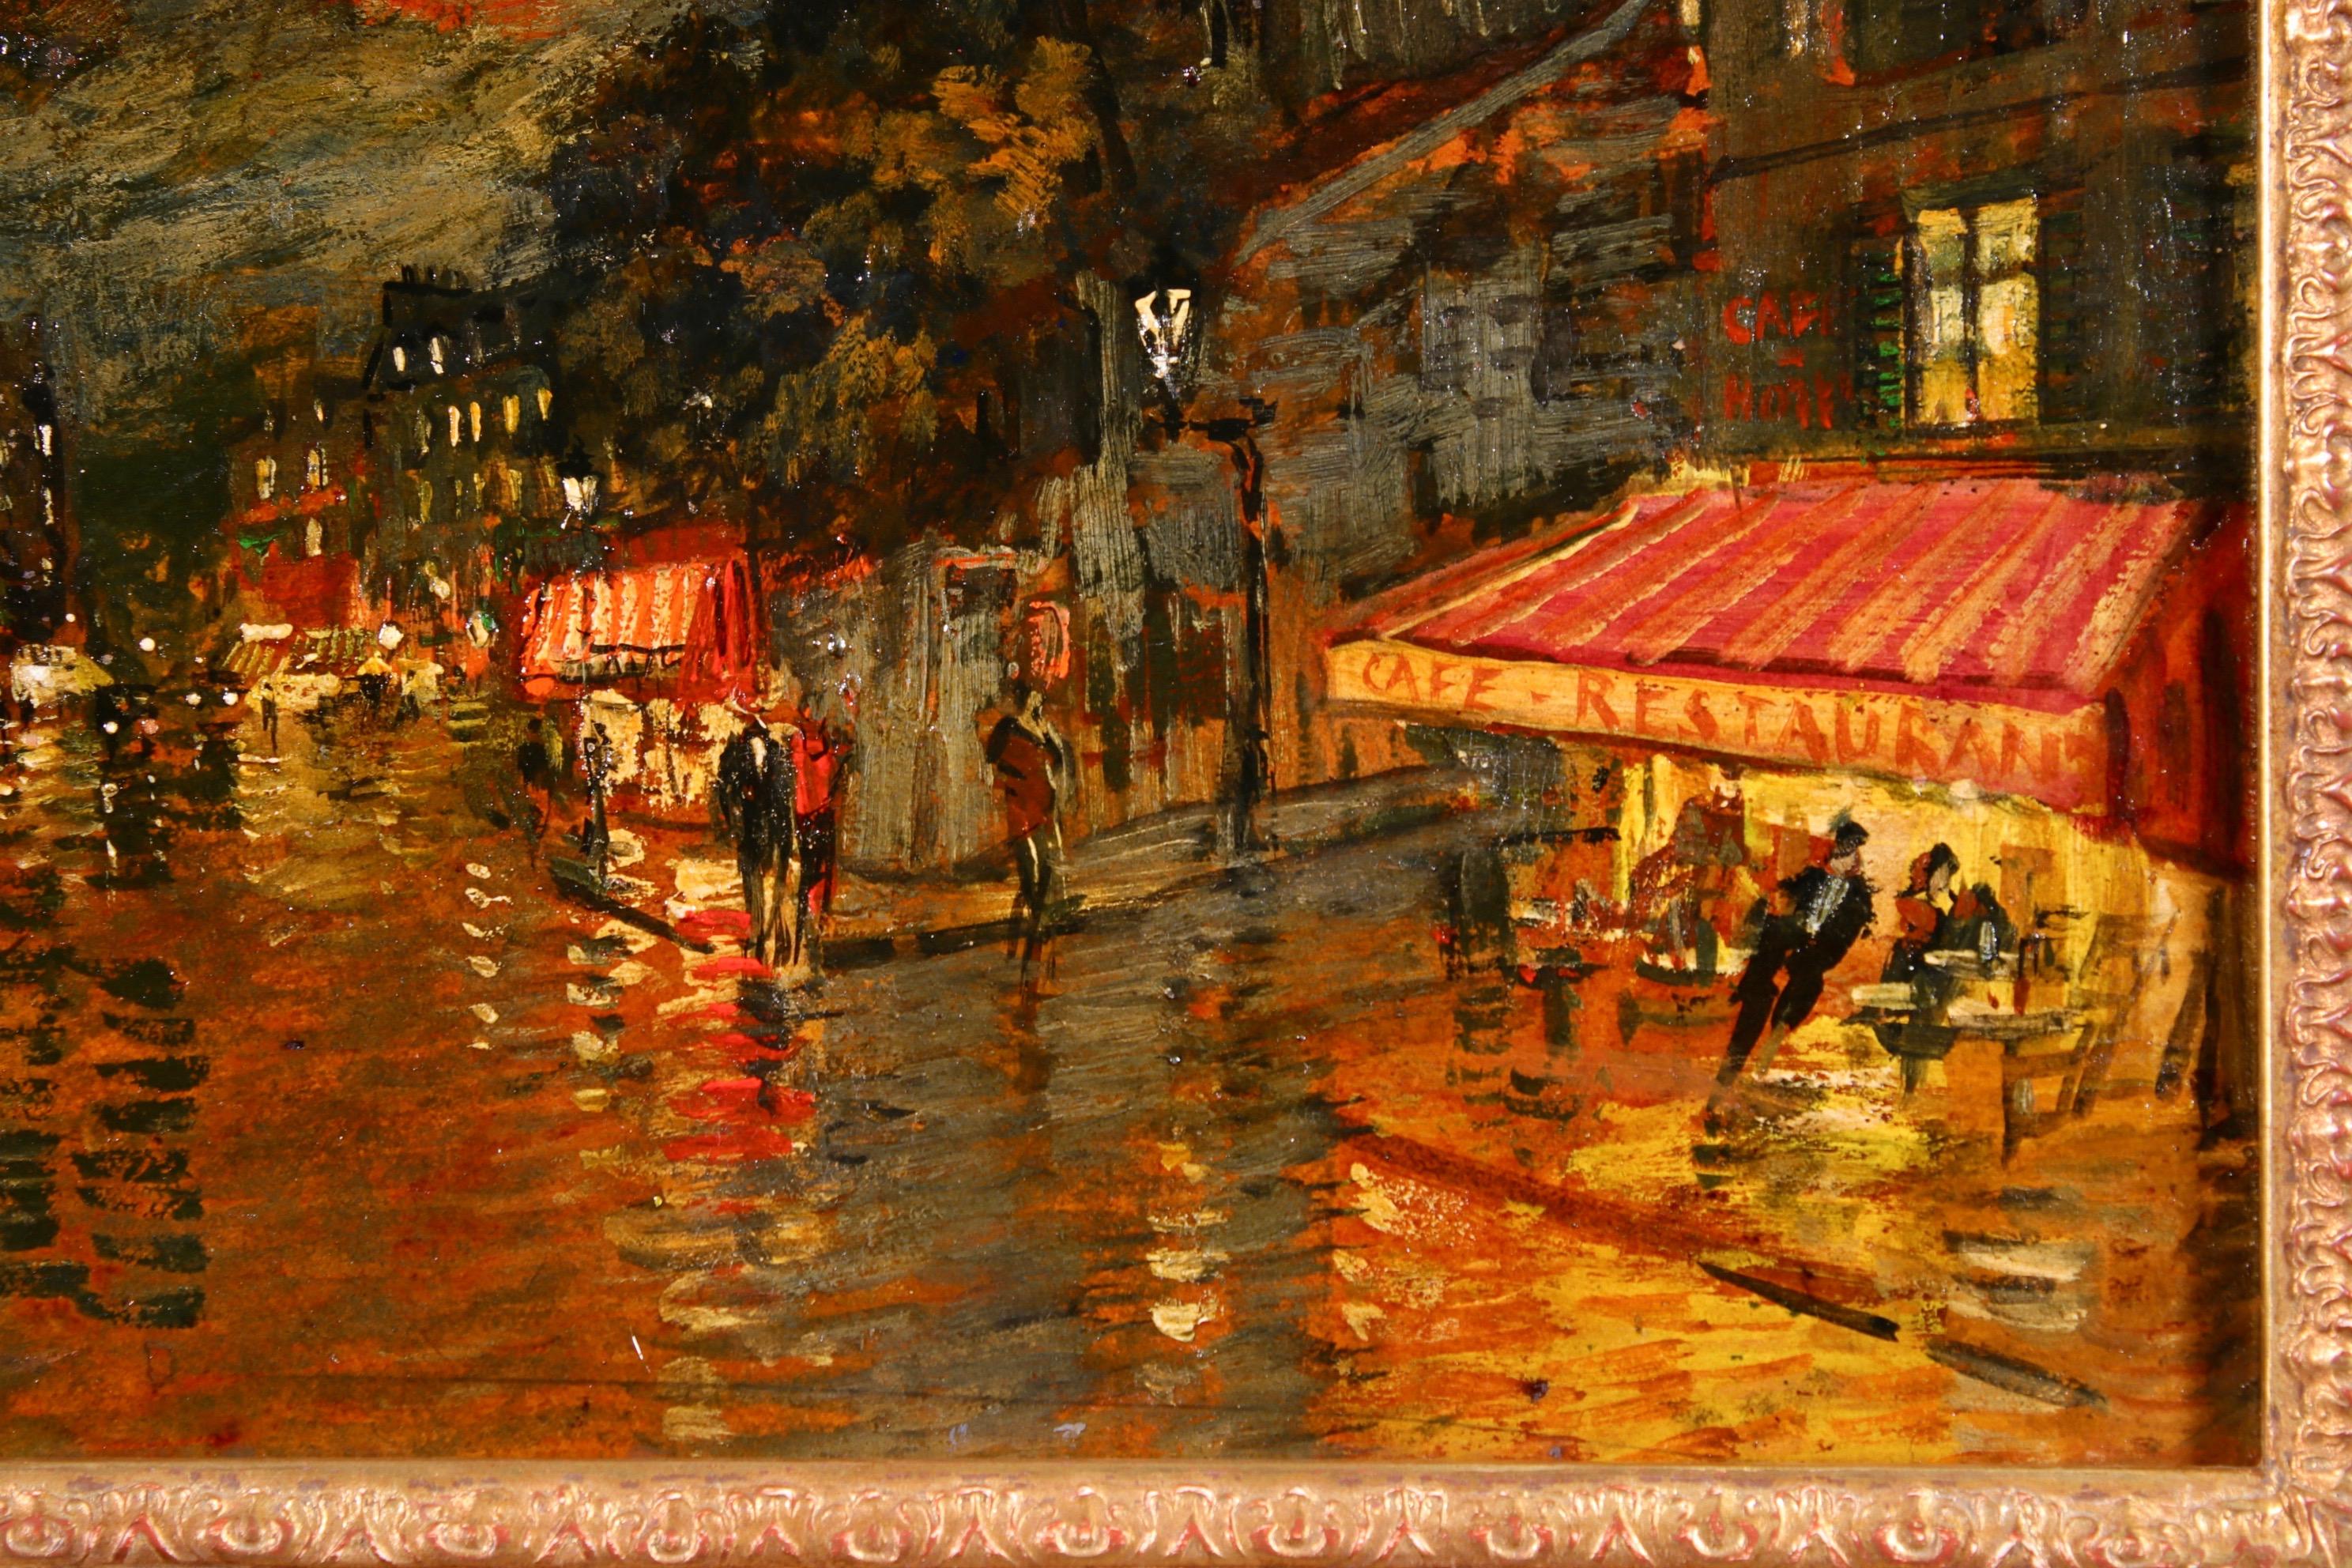 A Night in Paris - Impressionist Oil, Figures in Cityscape by Konstantin Korovin - Brown Figurative Painting by Konstantin Alekseyevich Korovin